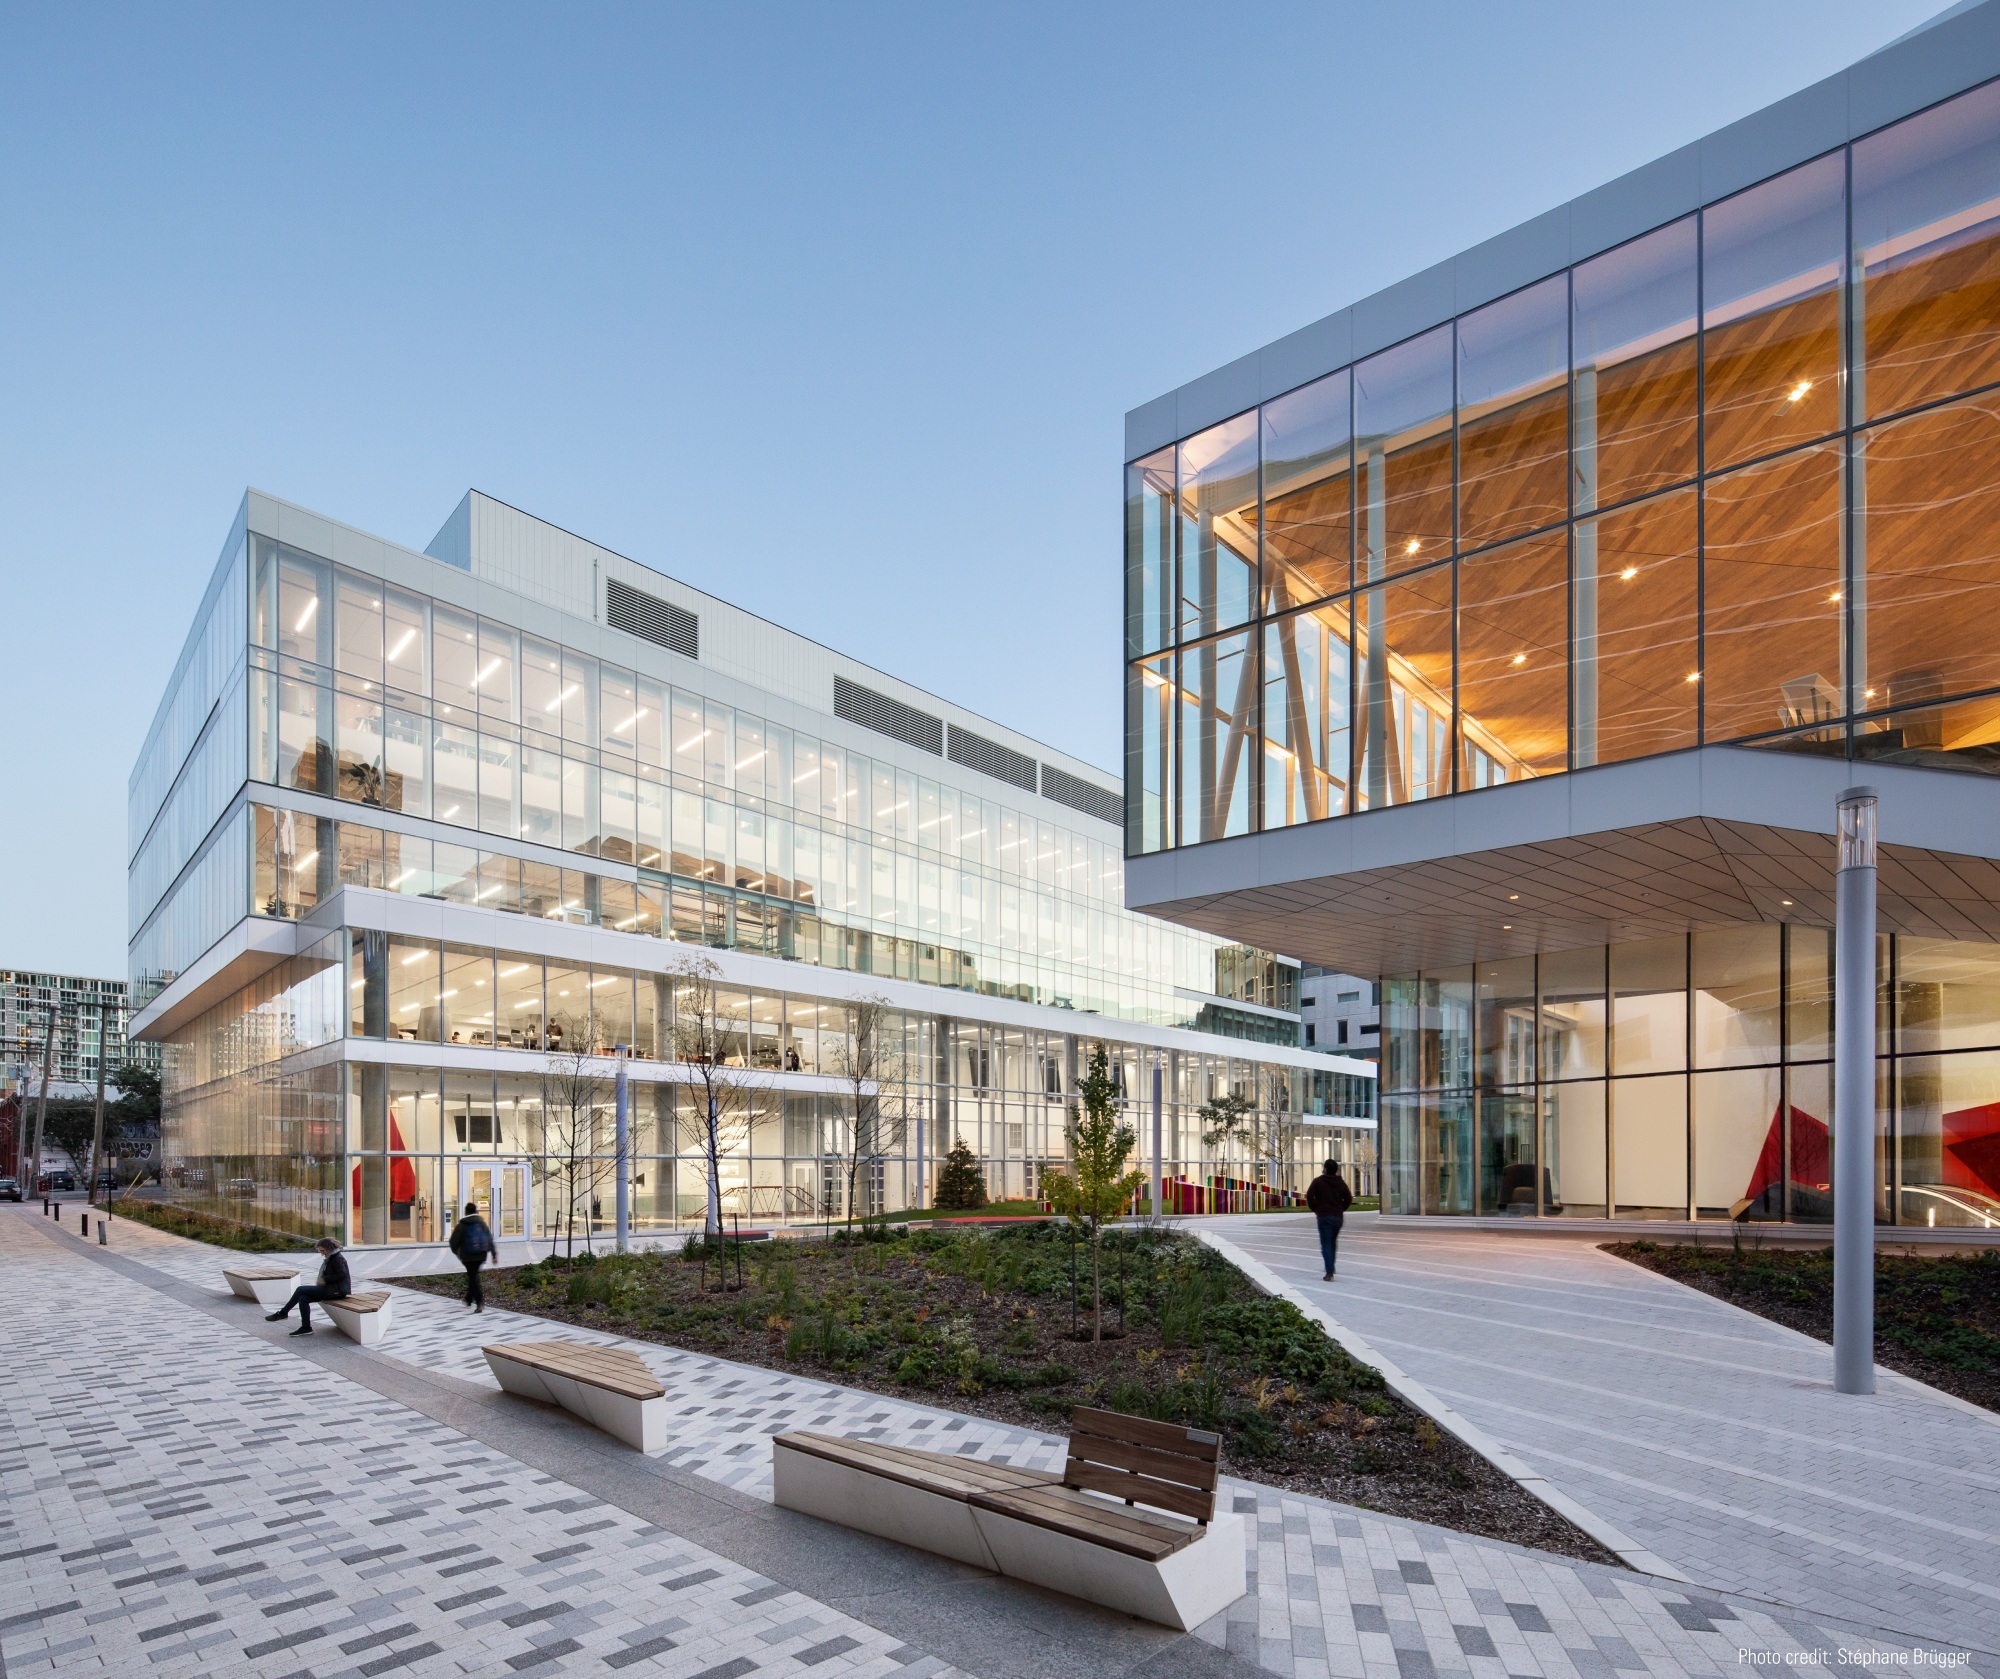 Modern university building with glass facade and outdoor seating area.